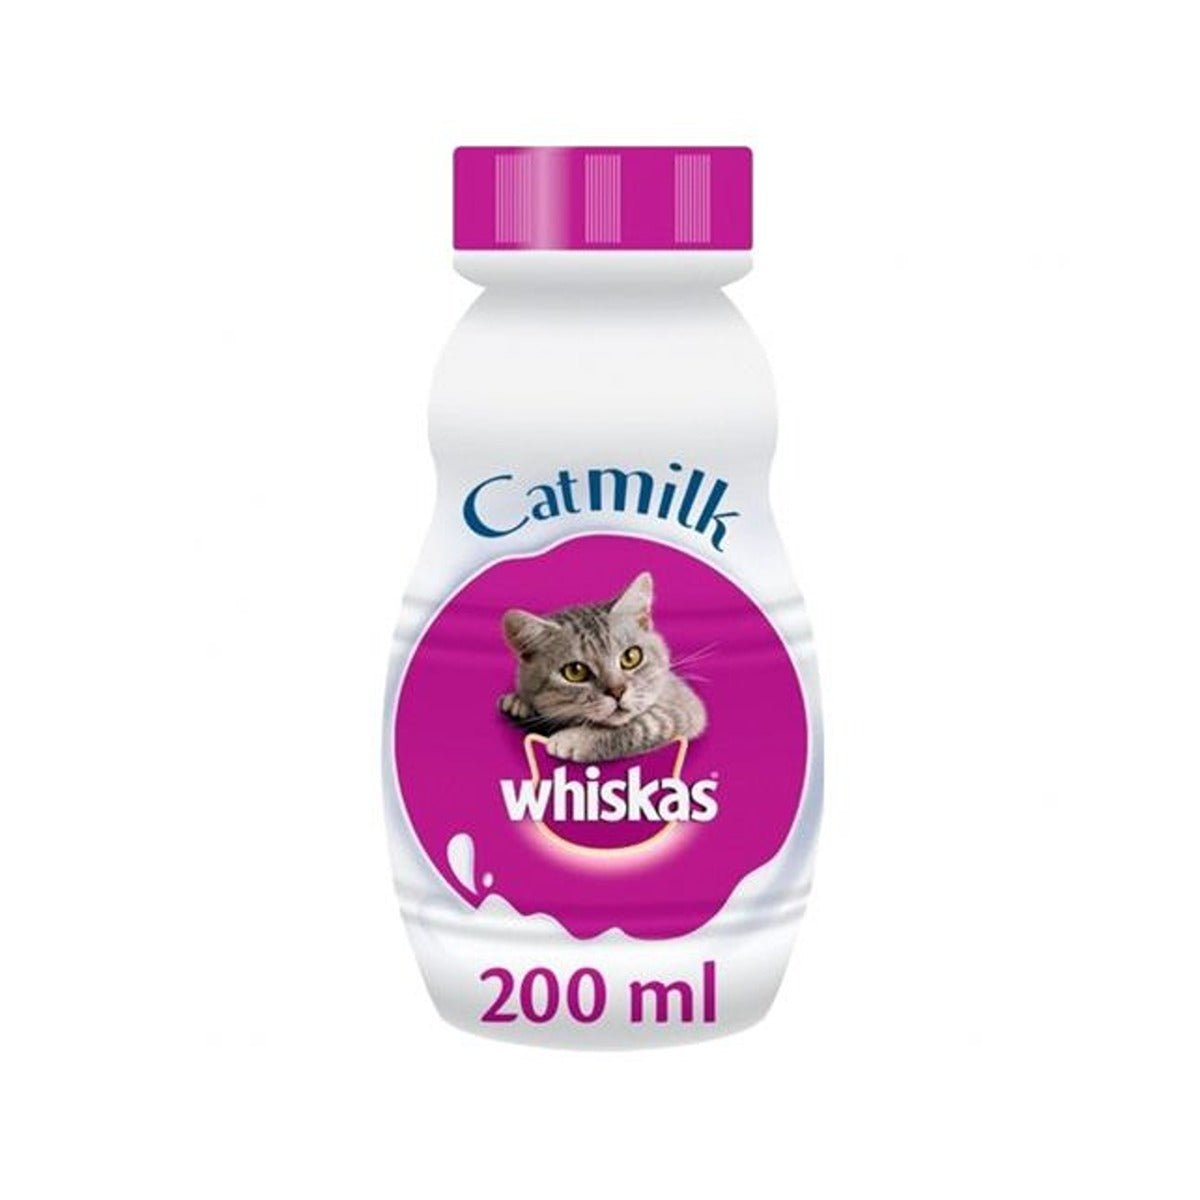 Whiskas - Catmilk - 200ml - Continental Food Store